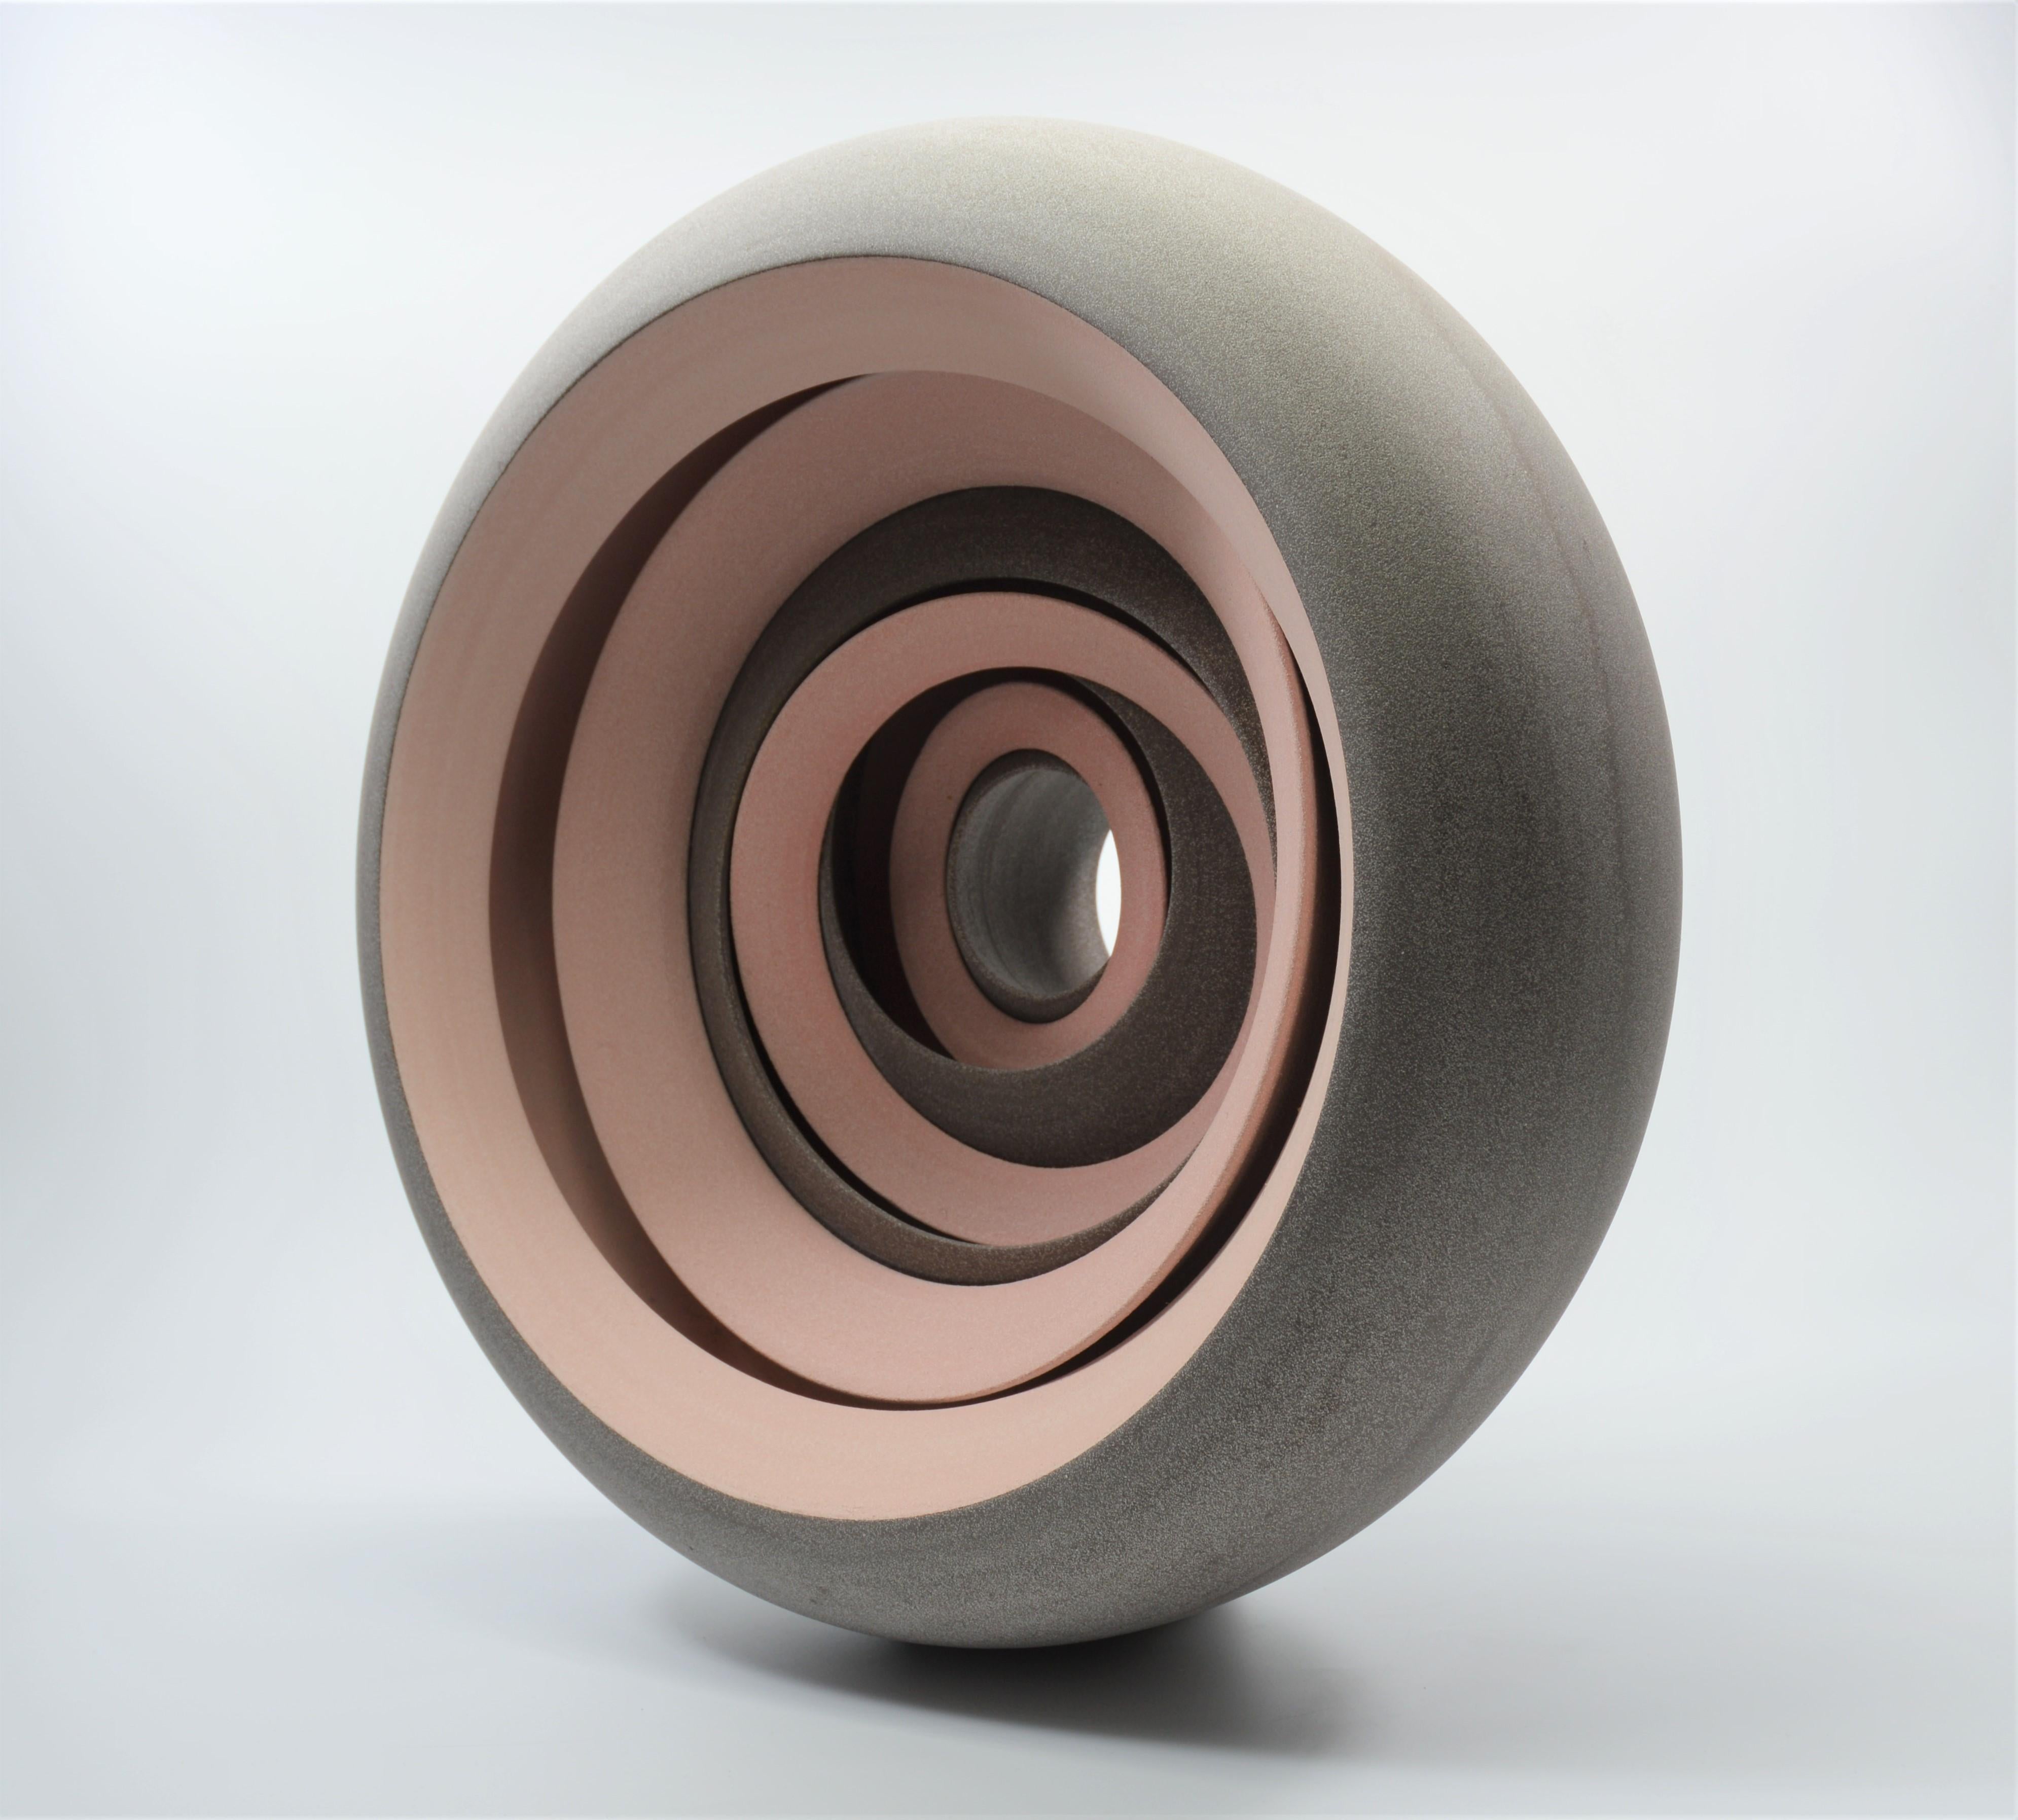 This mesmerising, subtly coloured pink and light grey, circular ceramic sculpture by Matthew Chambers is a true testament to this artist's highly accomplished technical skill and complete understanding of form. Matthew's ceramic sculptures push the